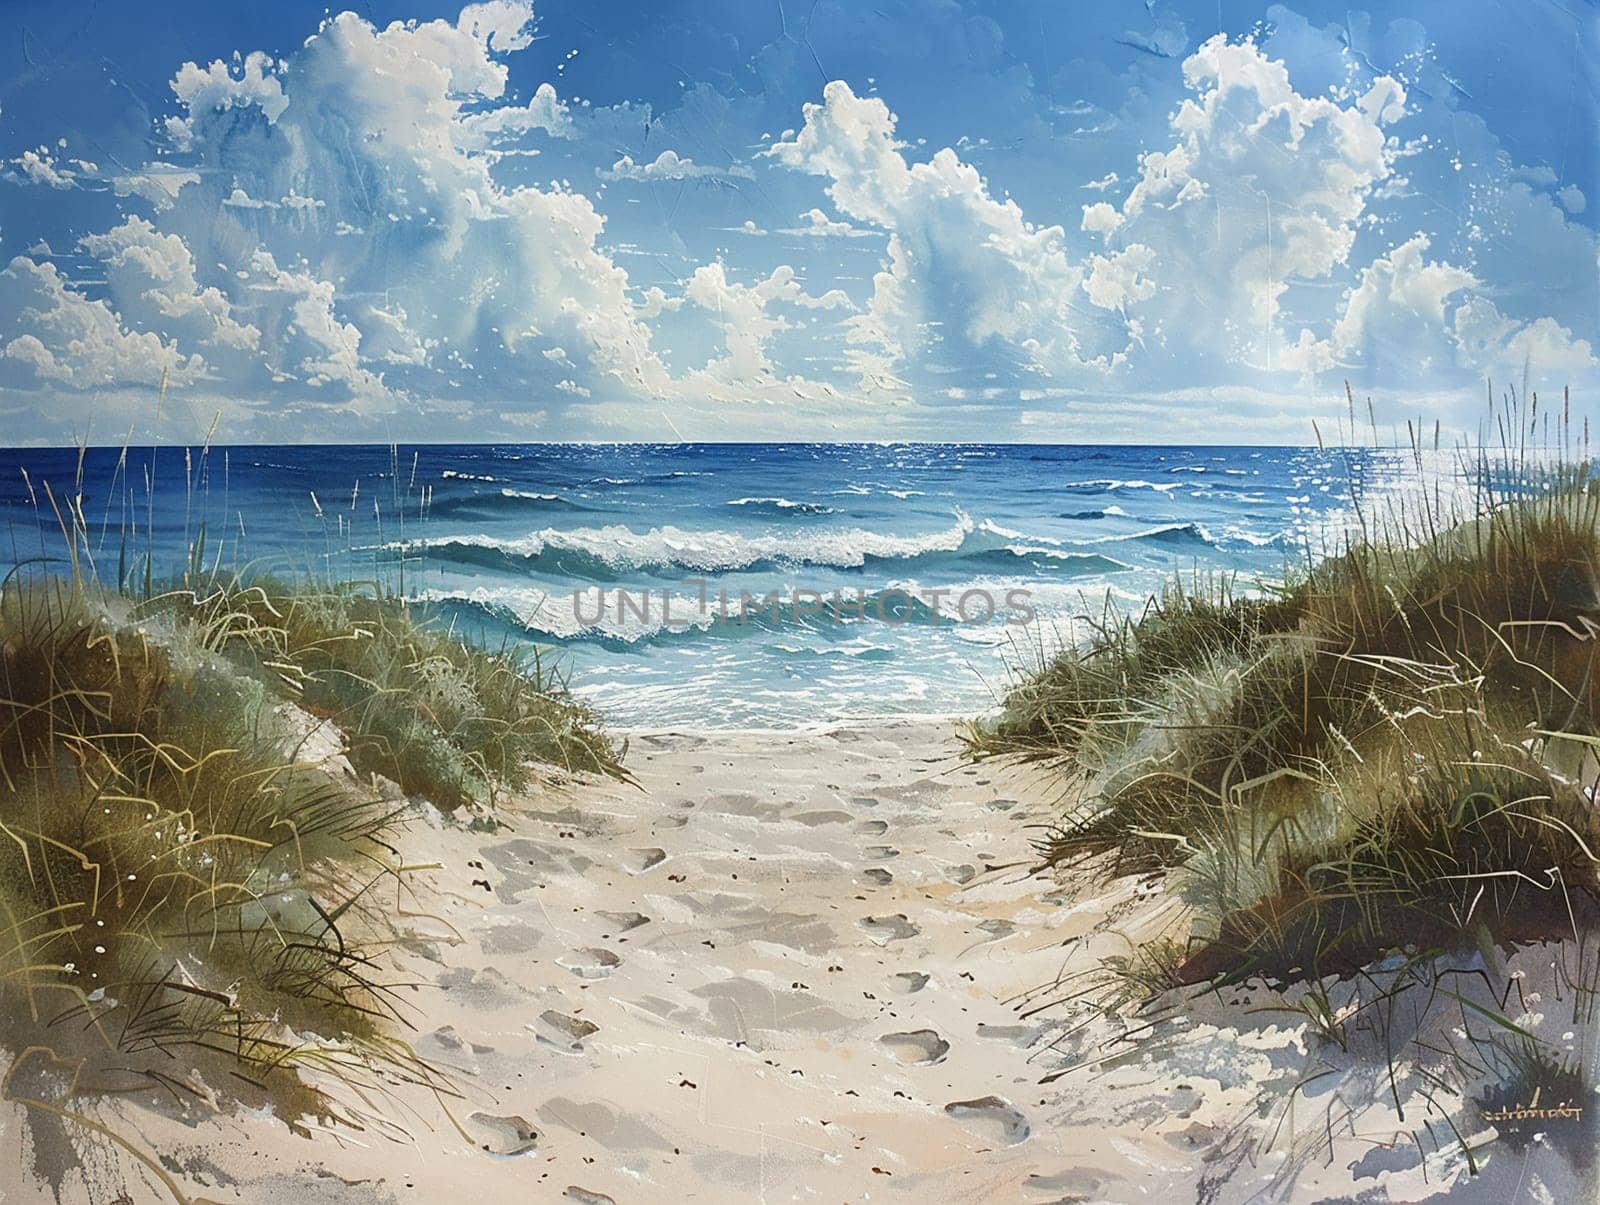 Drawing of a serene beach scene, illustrated in acrylics for a royalty-free painting.